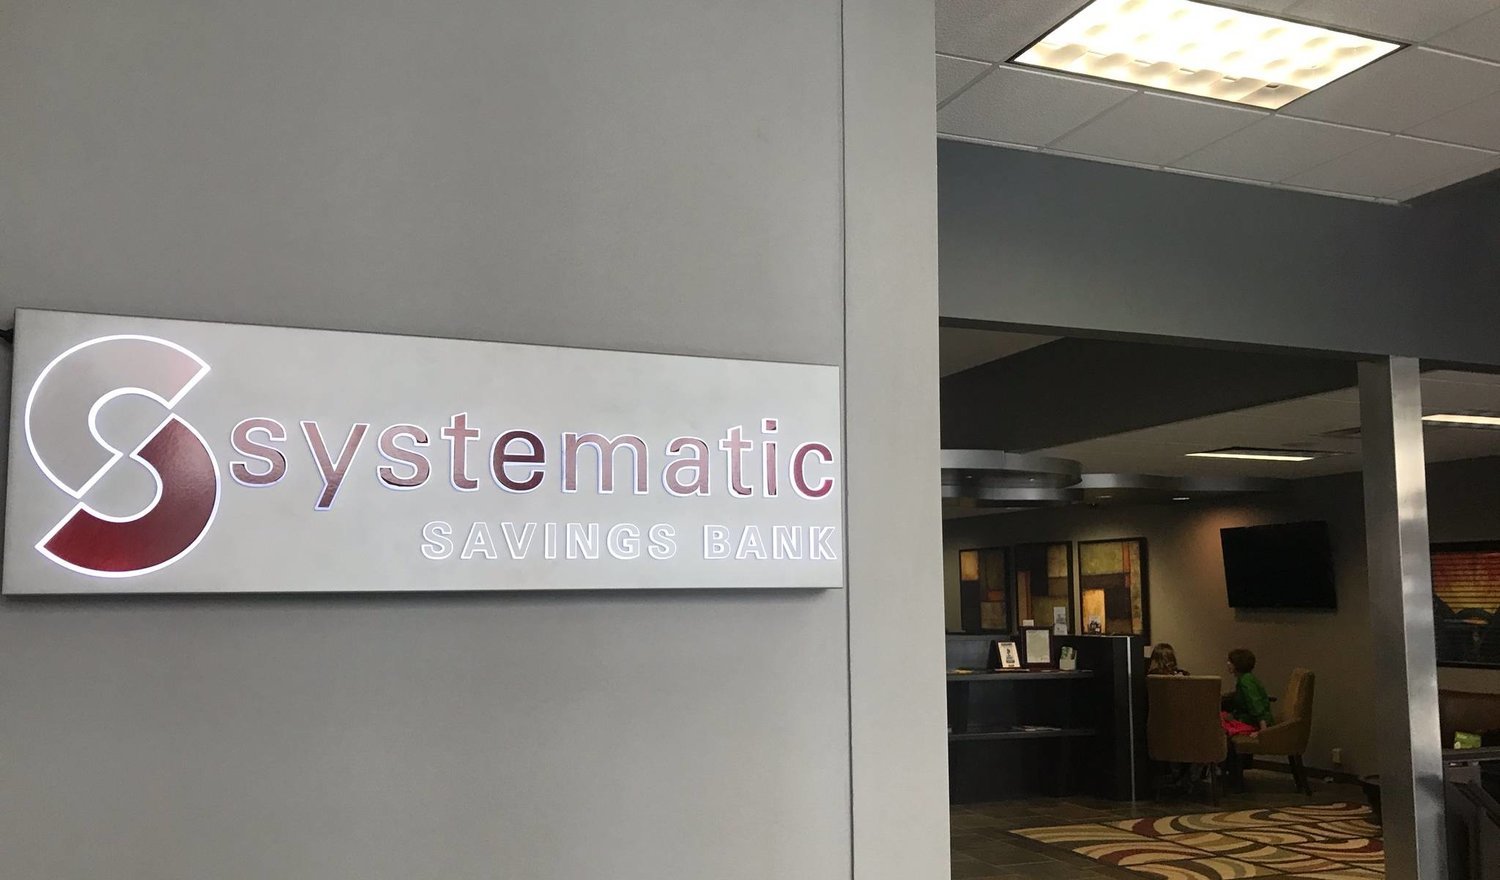 Systematic Savings Bank now is operating as a stock savings bank.